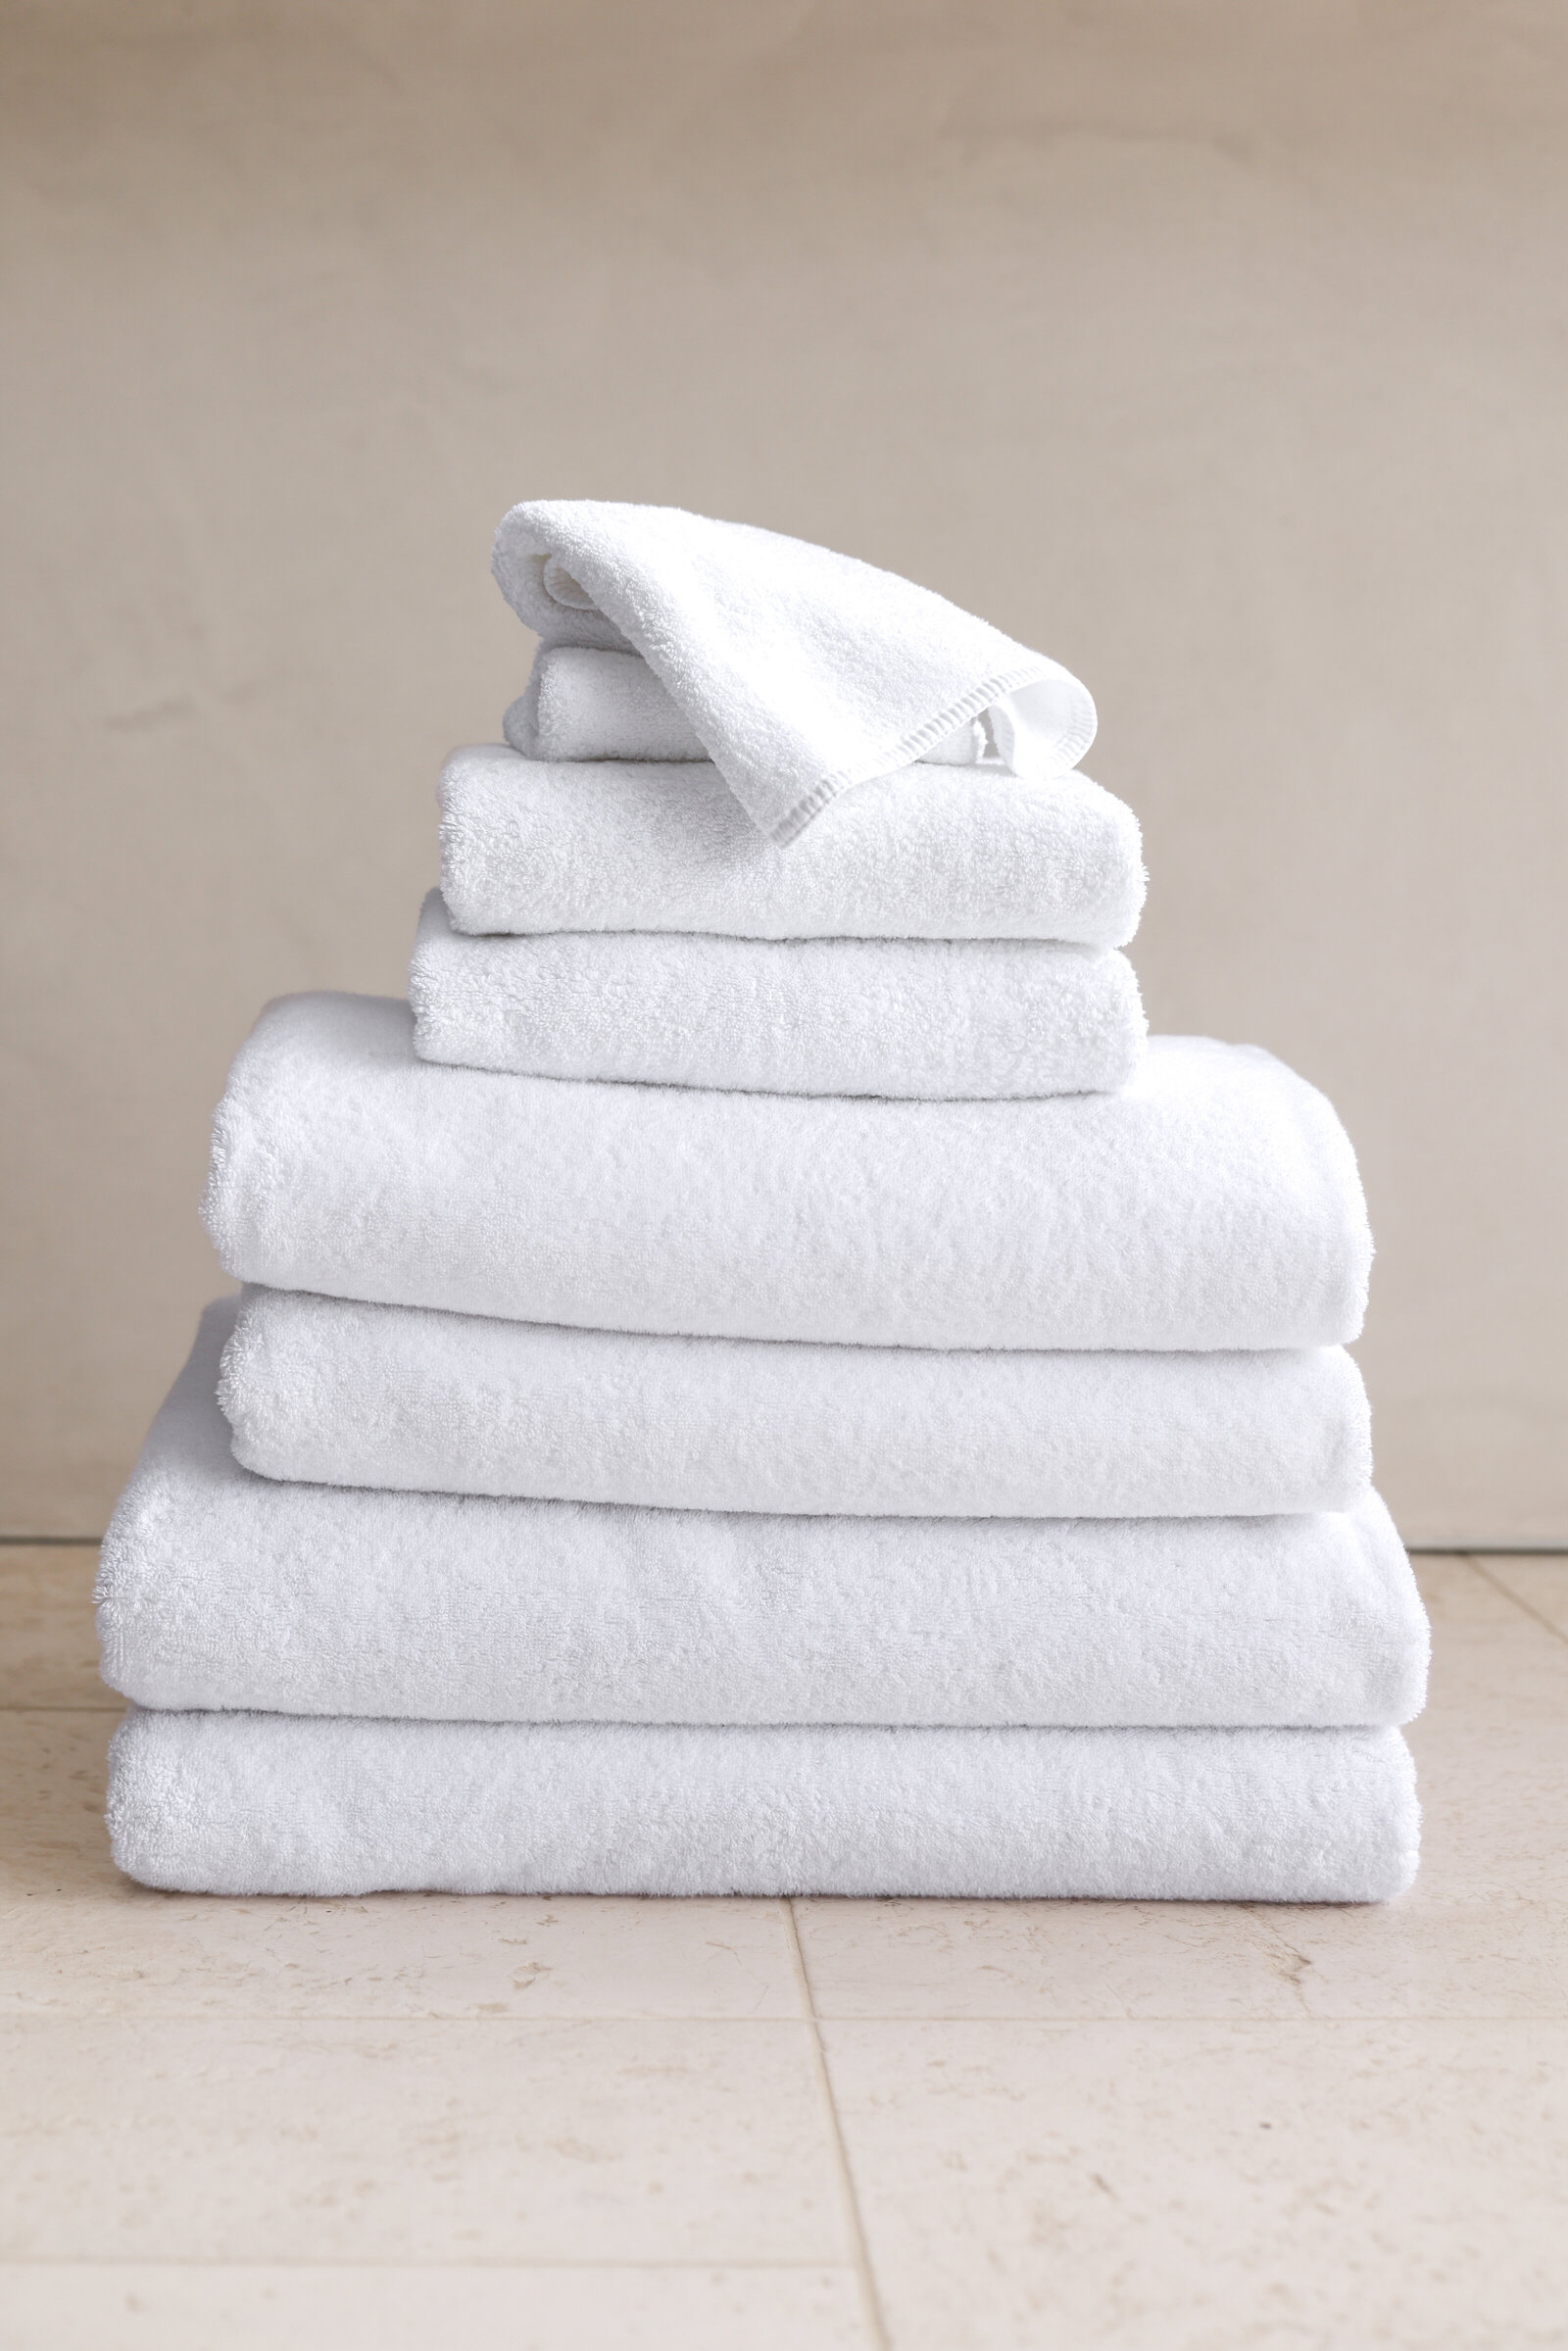 Commercial Lifestyle product photography ecommerce for luxurious organic towels washcloths bedding linen company brooklinen